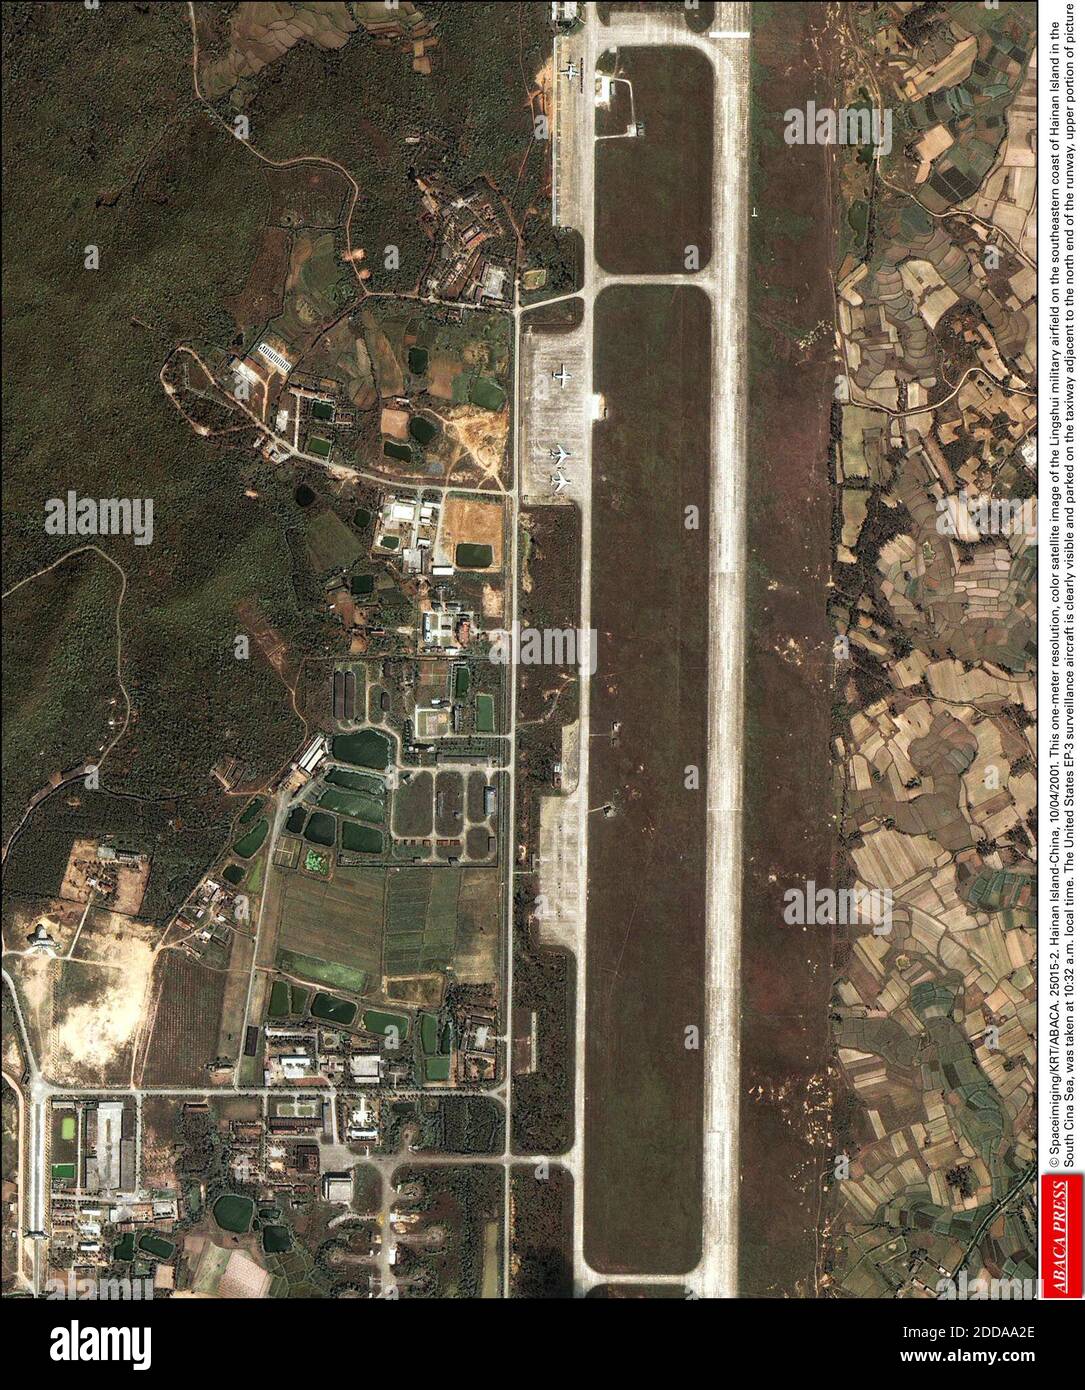 NO FILM, NO VIDEO, NO TV, NO DOCUMENTARY - © Spaceimiging/KRT/ABACA. 25015-2. Hainan Island-China, 10/04/2001. This one-meter resolution, color satellite image of the Lingshui military airfield on the southeastern coast of Hainan Island in the South Cina Sea, was taken at 10:32 a.m. local time. Th Stock Photo